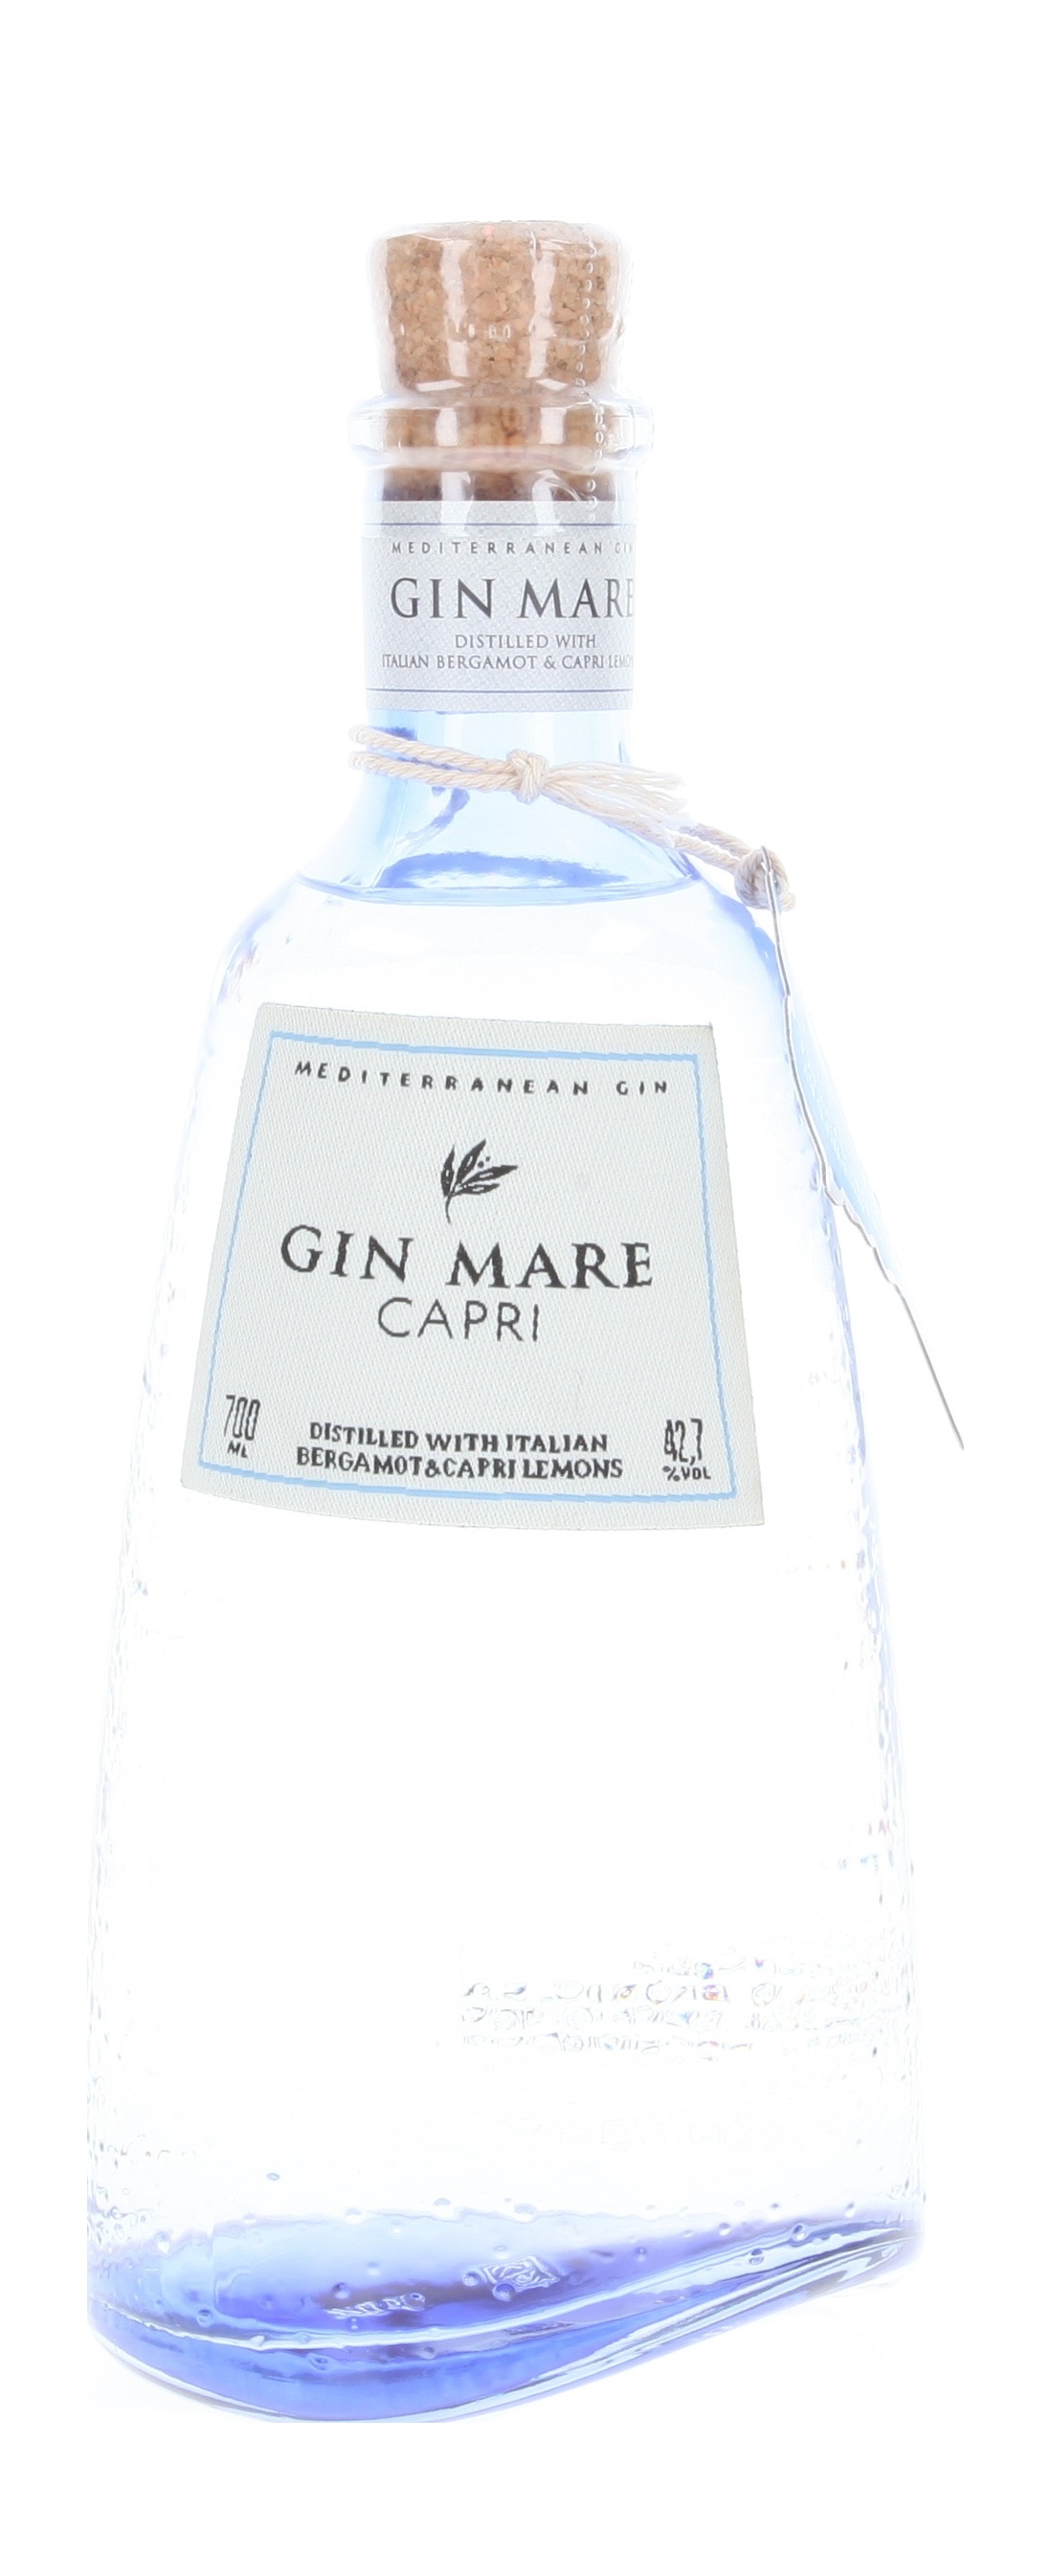 Gin Mare Capri | Whisky.de » To the online store